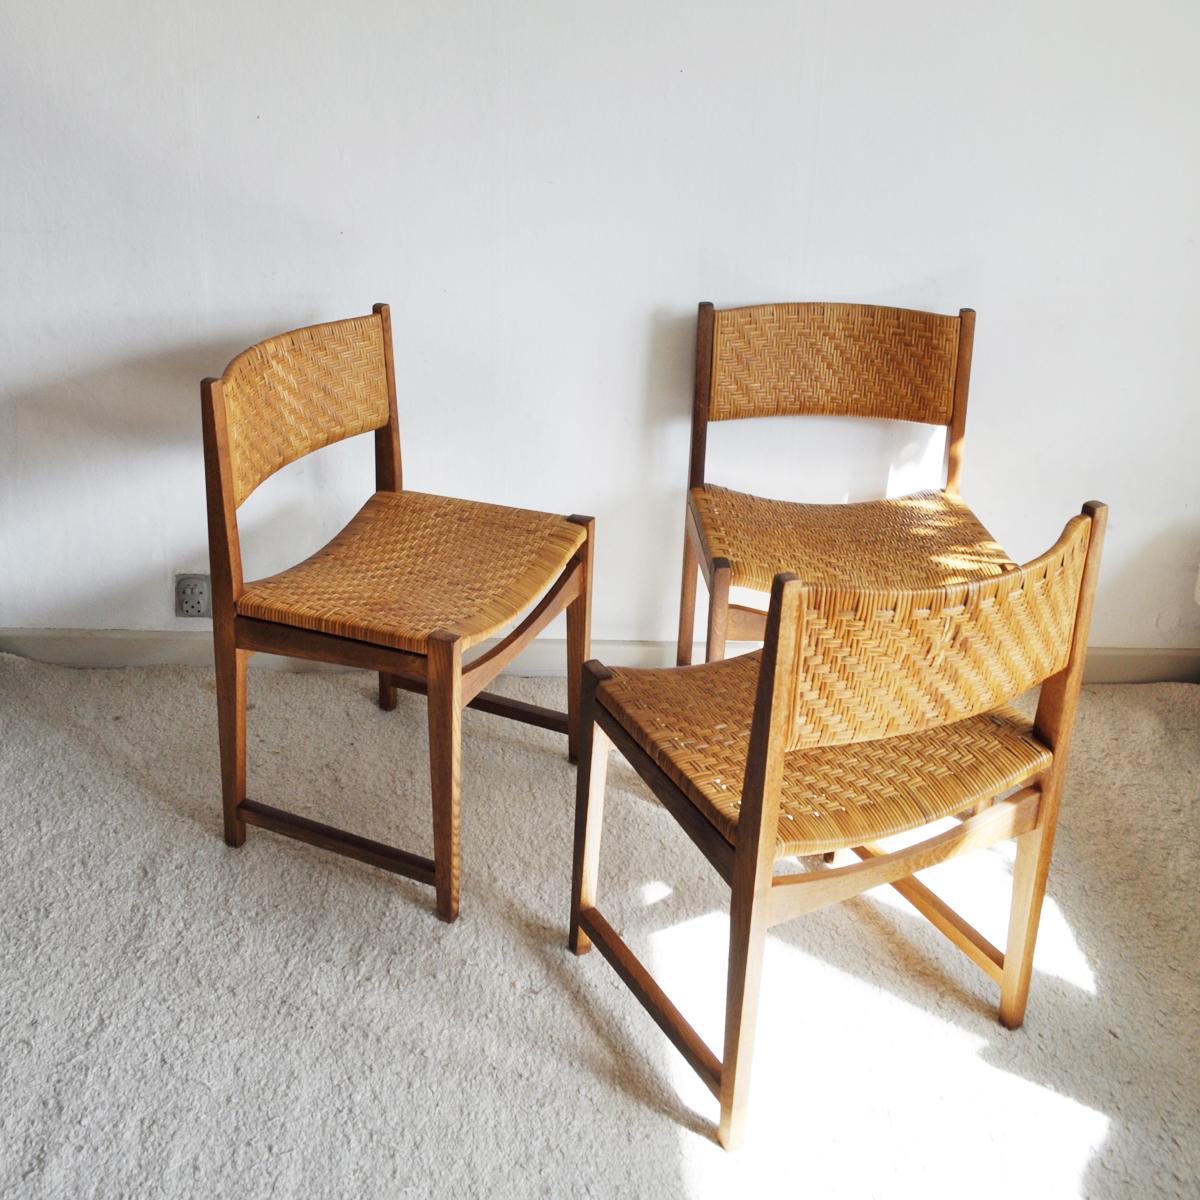 Set of three dining chairs model 351 designed by Peter Hvidt & Orla Mølgaard-Nielsen made of solid oak, woven cane seat and backpiece. Original cane in a good condition. Manufactured by Søborg Møbler, 1959.
Patinated with signs of wear consistent